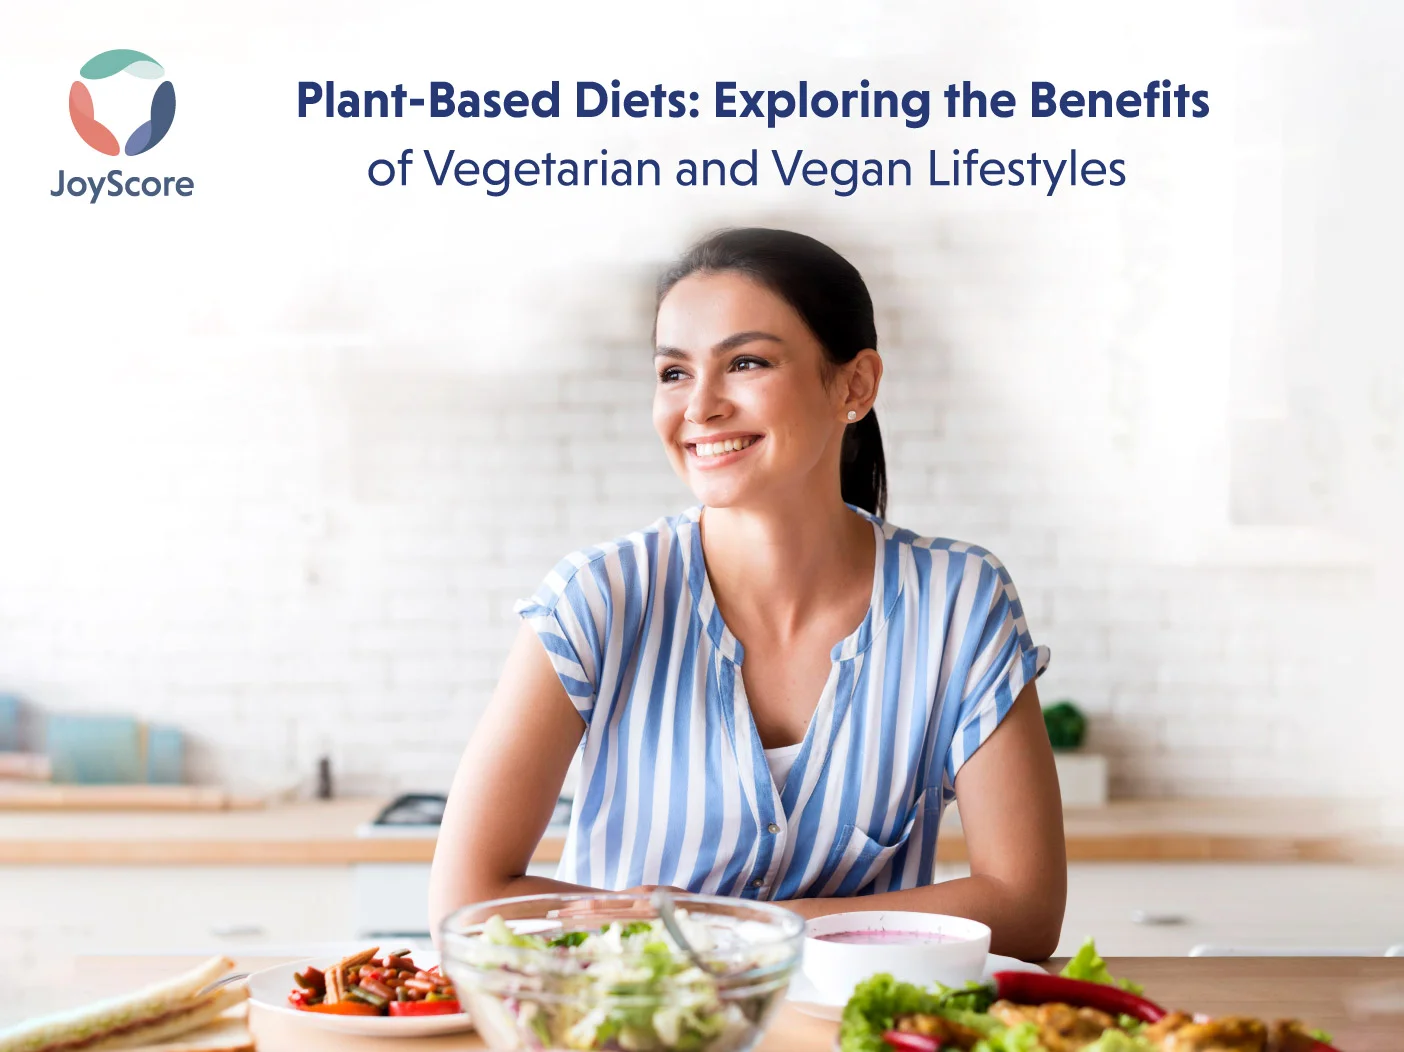 Plant-Based Diets Exploring the Benefits of Vegetarian and Vegan Lifestyles